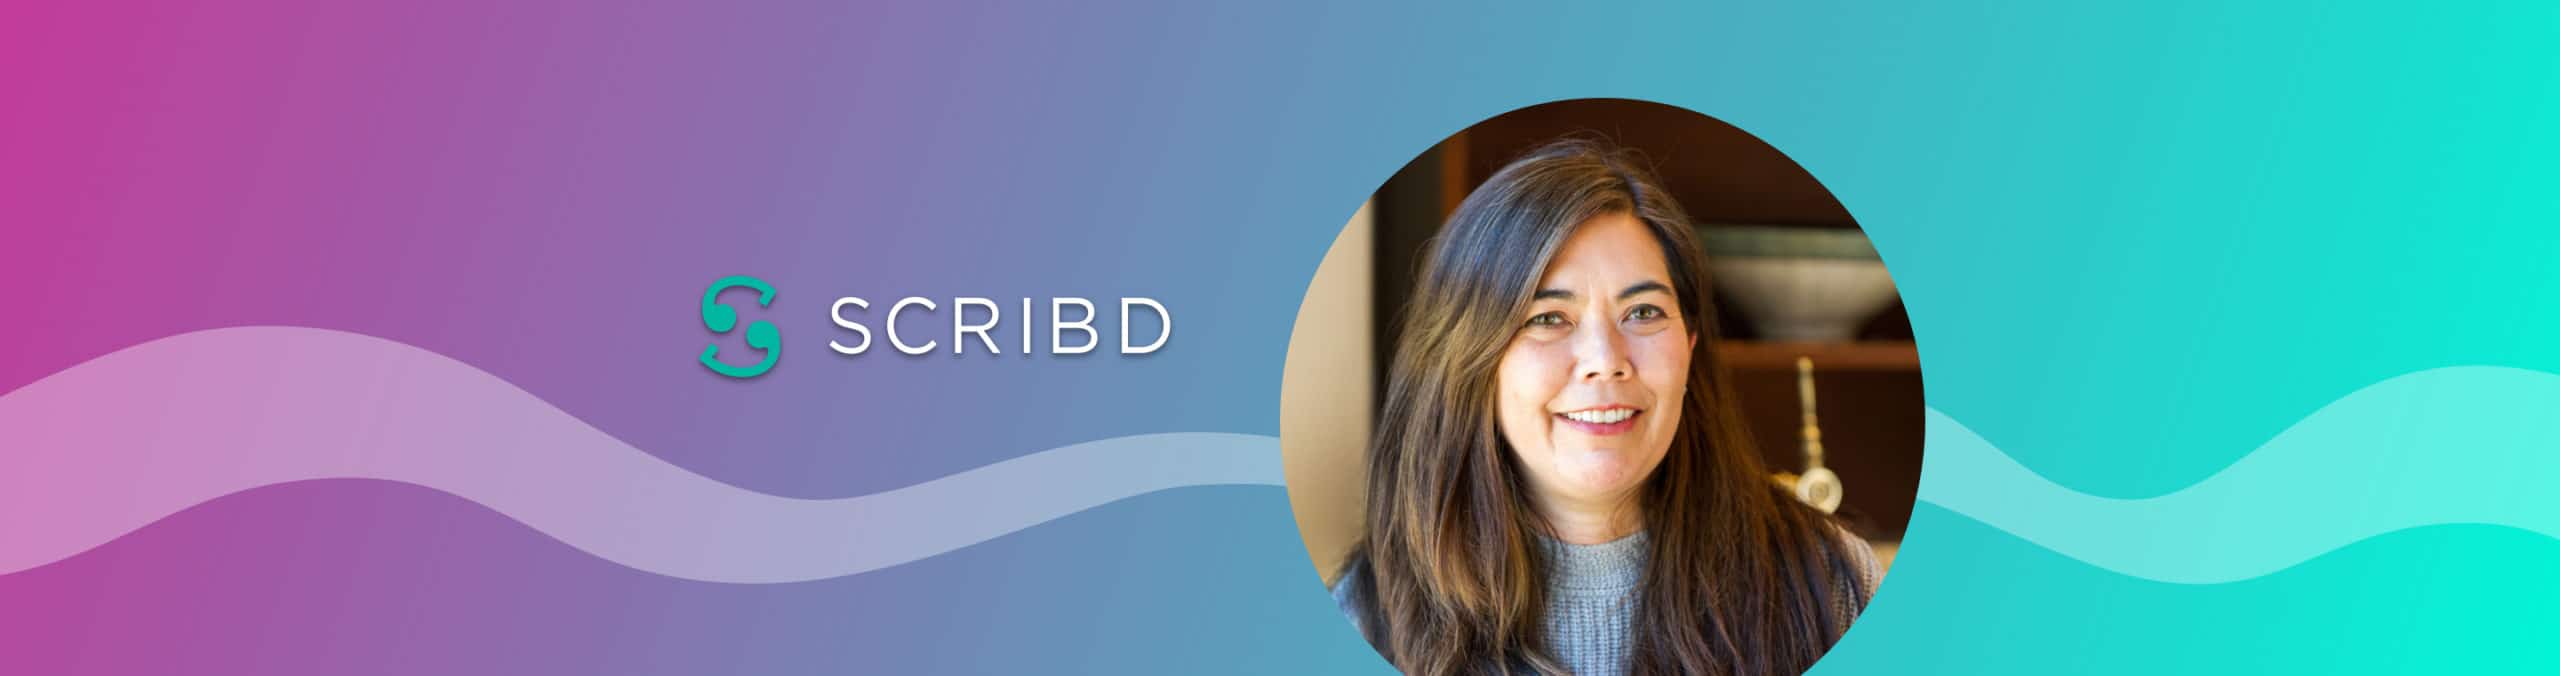 Laura Malinasky joins Scribd’s Executive Team as Chief Legal Officer and General Counsel